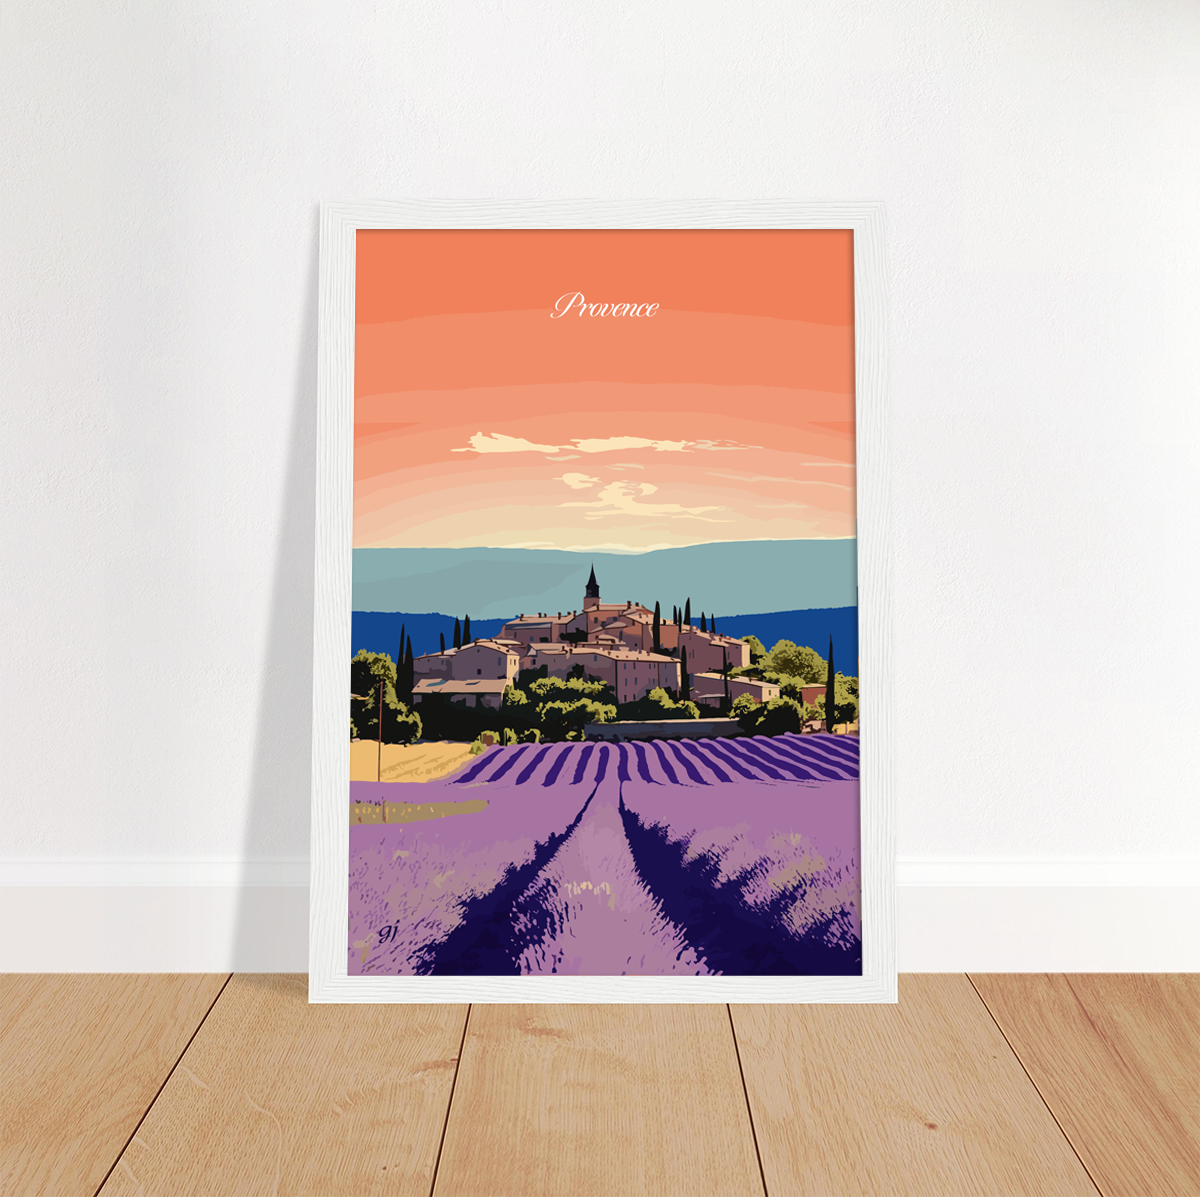 Provence | Travel Poster